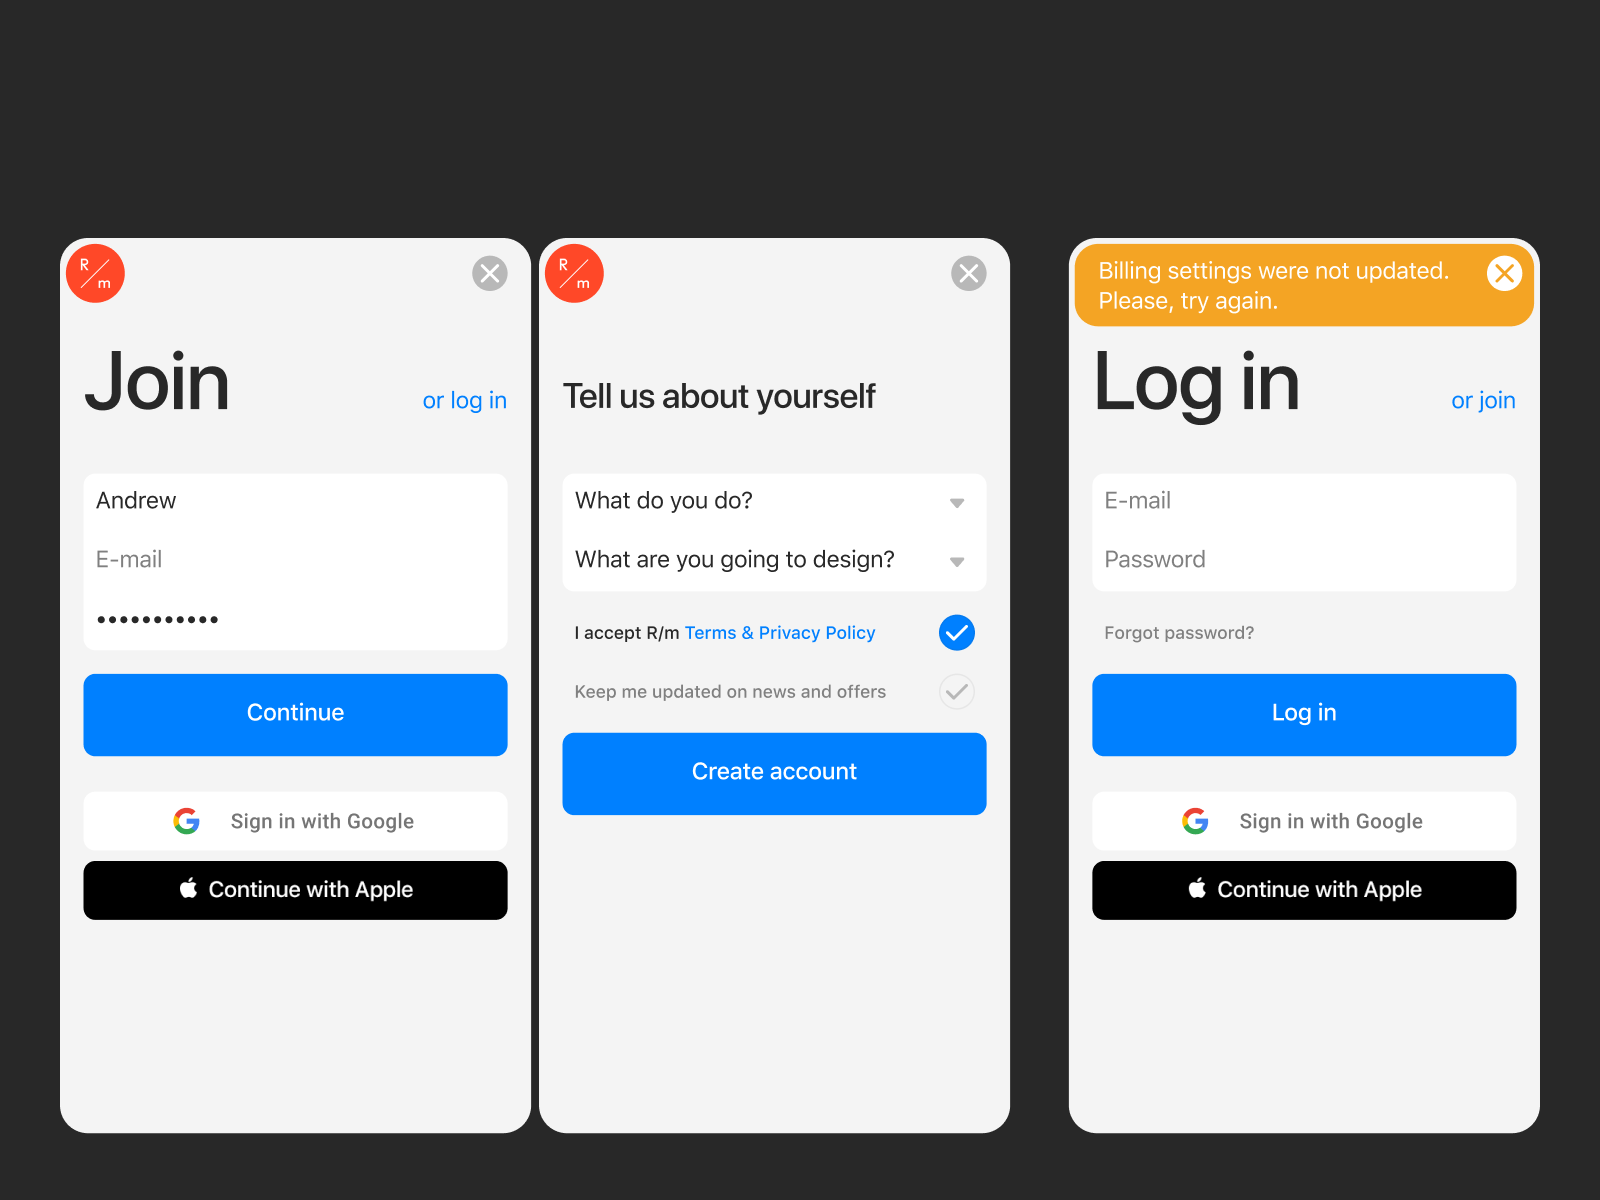 a-refreshed-look-of-the-log-in-form-by-readymag-on-dribbble